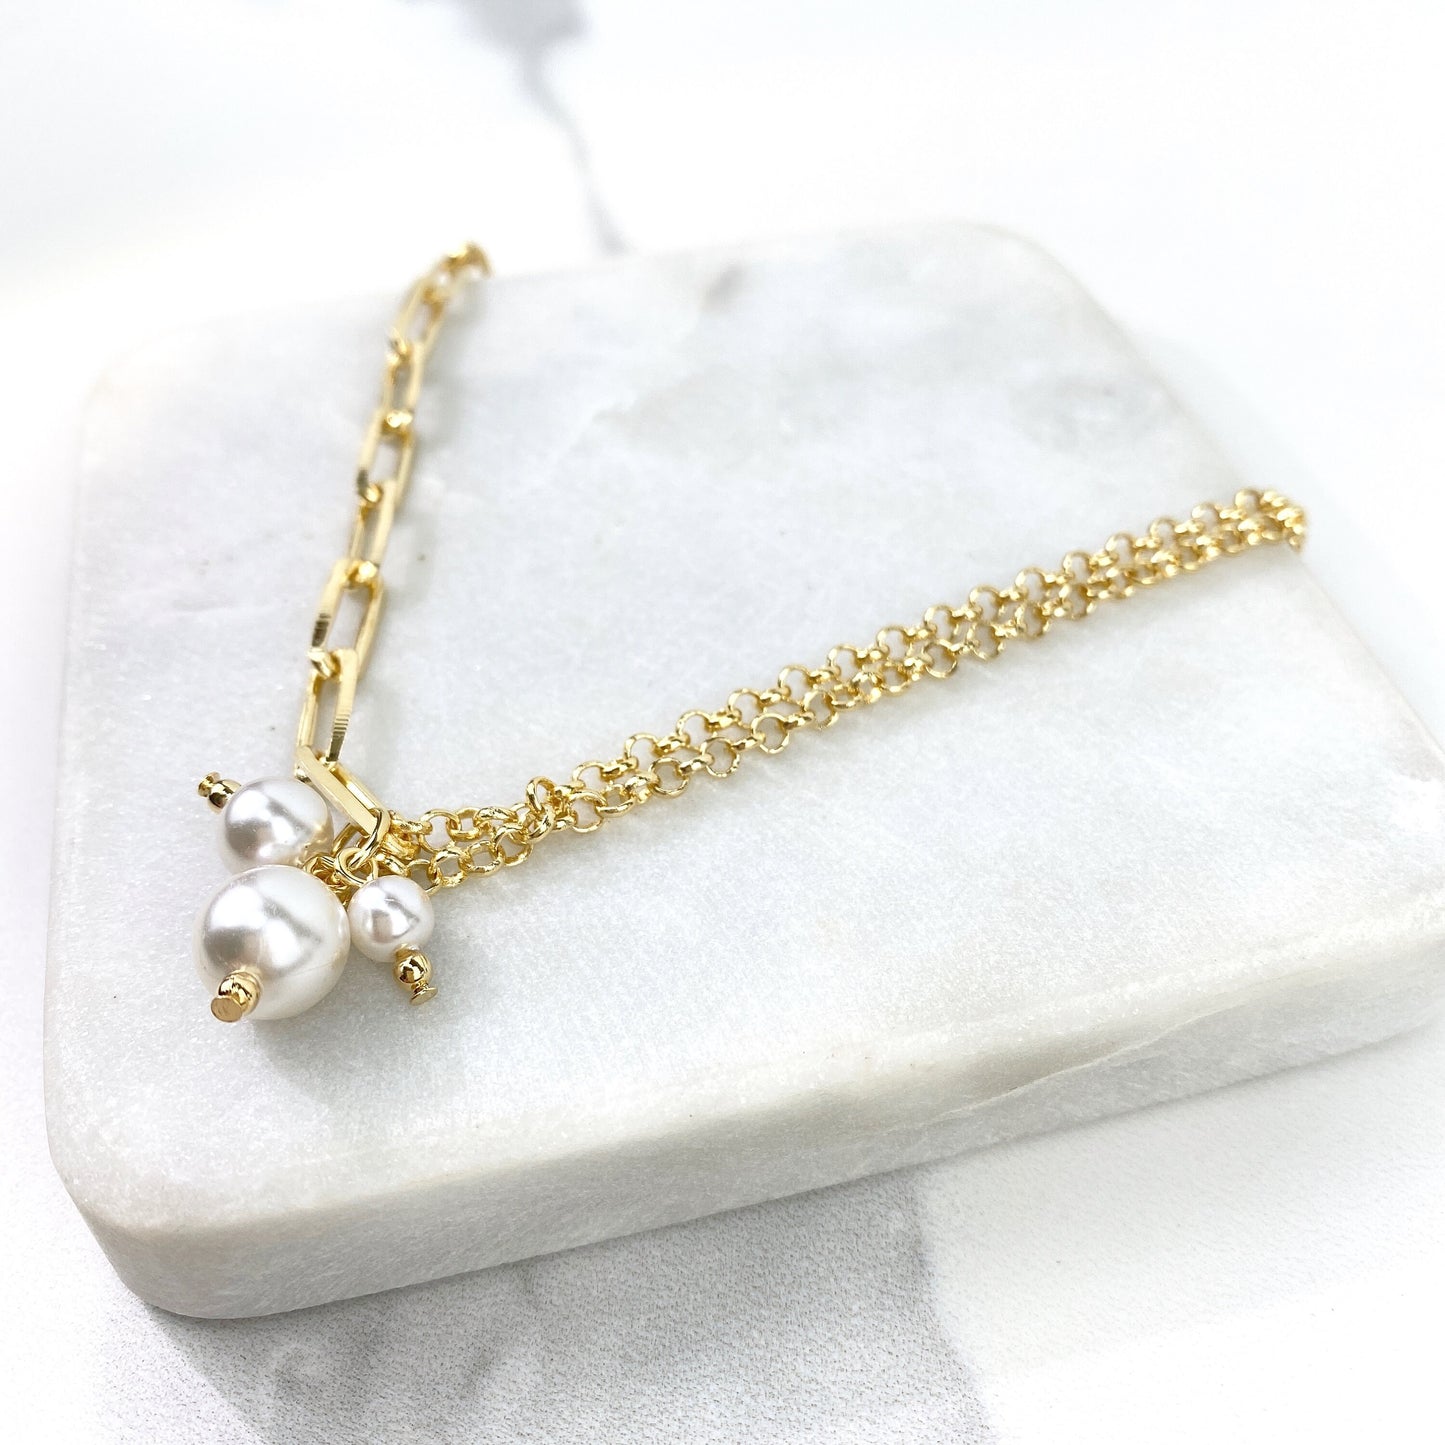 18k Gold Filled Bracelet or Necklace with Paper Clip Chain, Rolo Link Chain, Three White Plastic Simulated Pearls Wholesale Jewelry Supplies